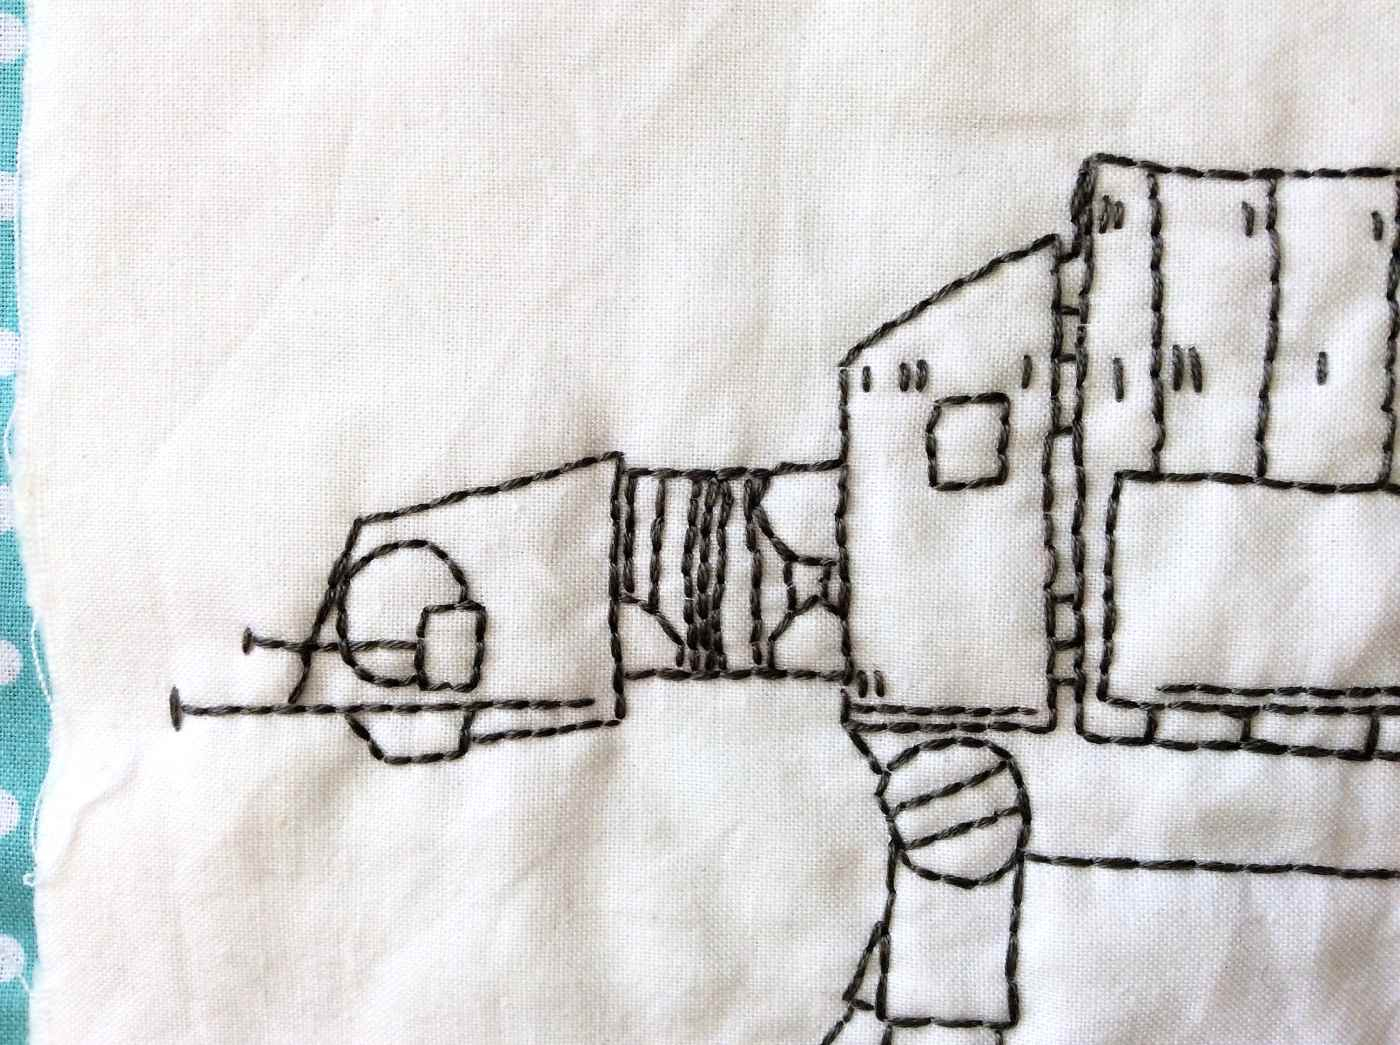 Star Wars Embroidery Pattern 7 Free Embroidery Patterns Inspired Star Wars